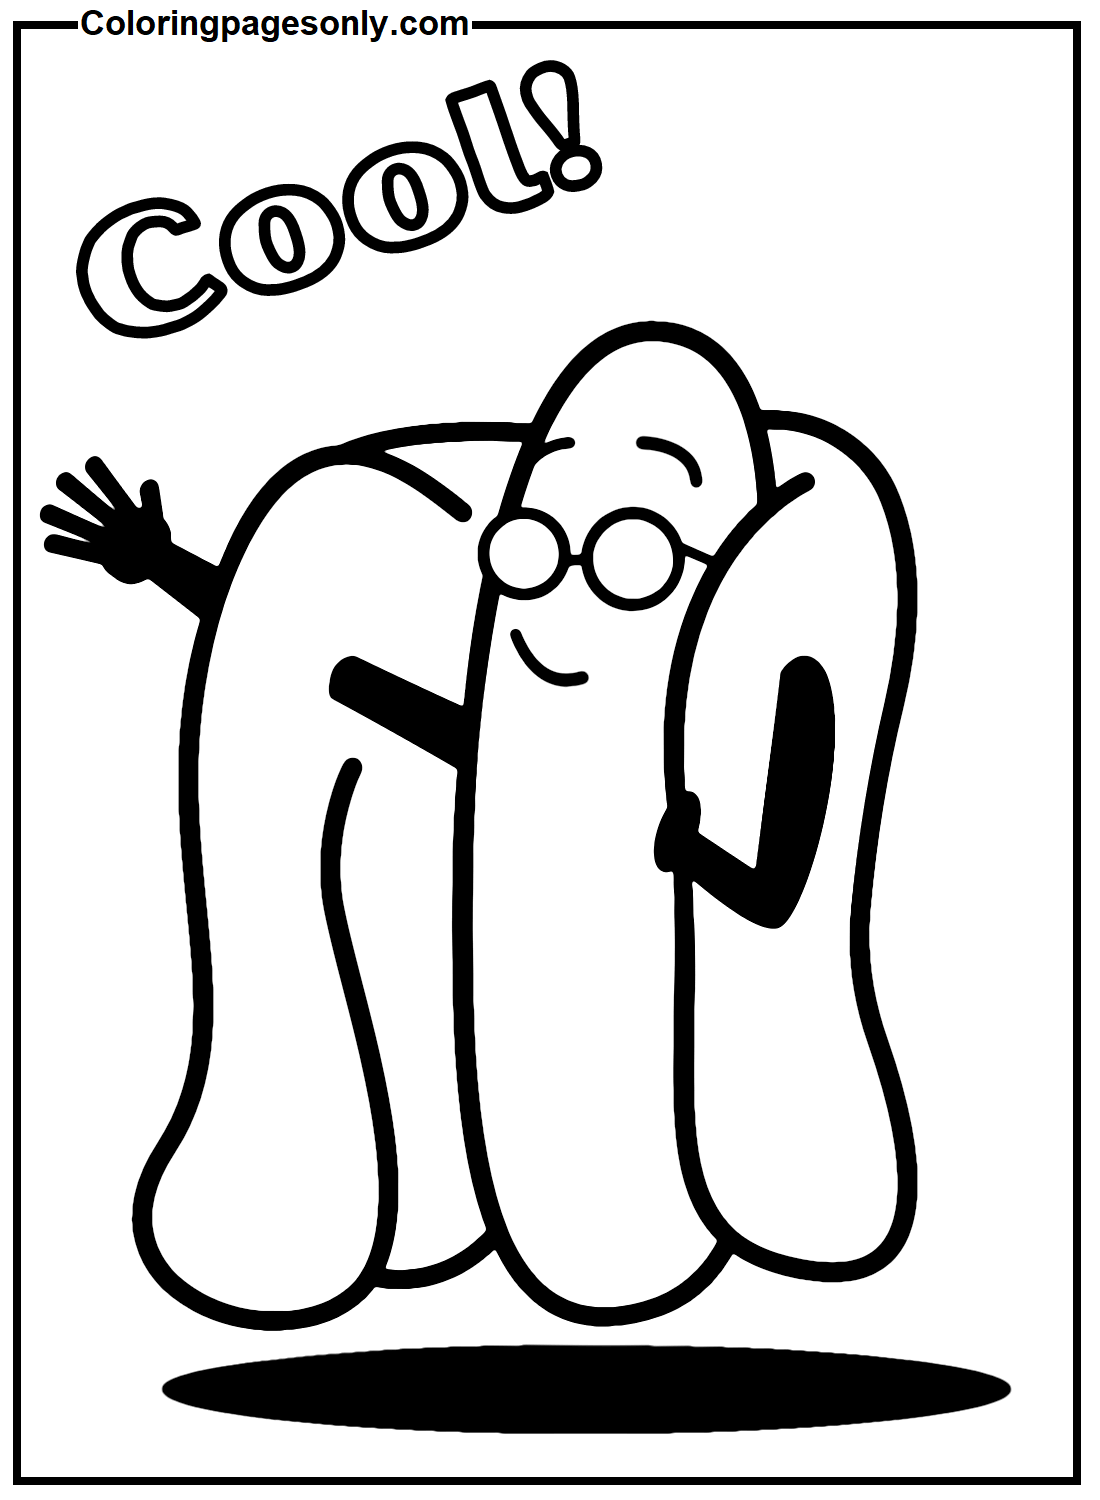 Cool Hot Dog Coloring Pages